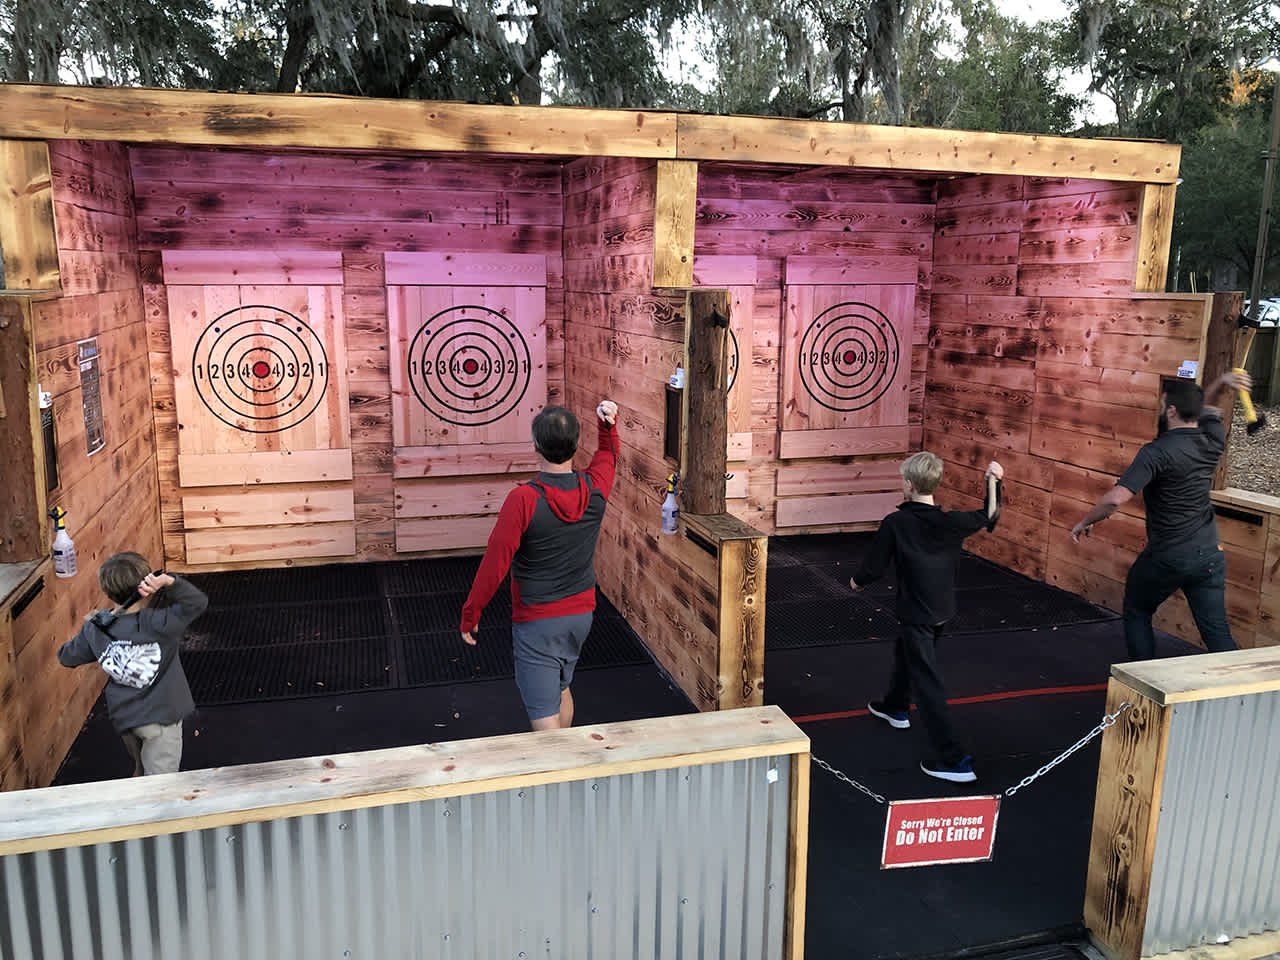 People throwing axes